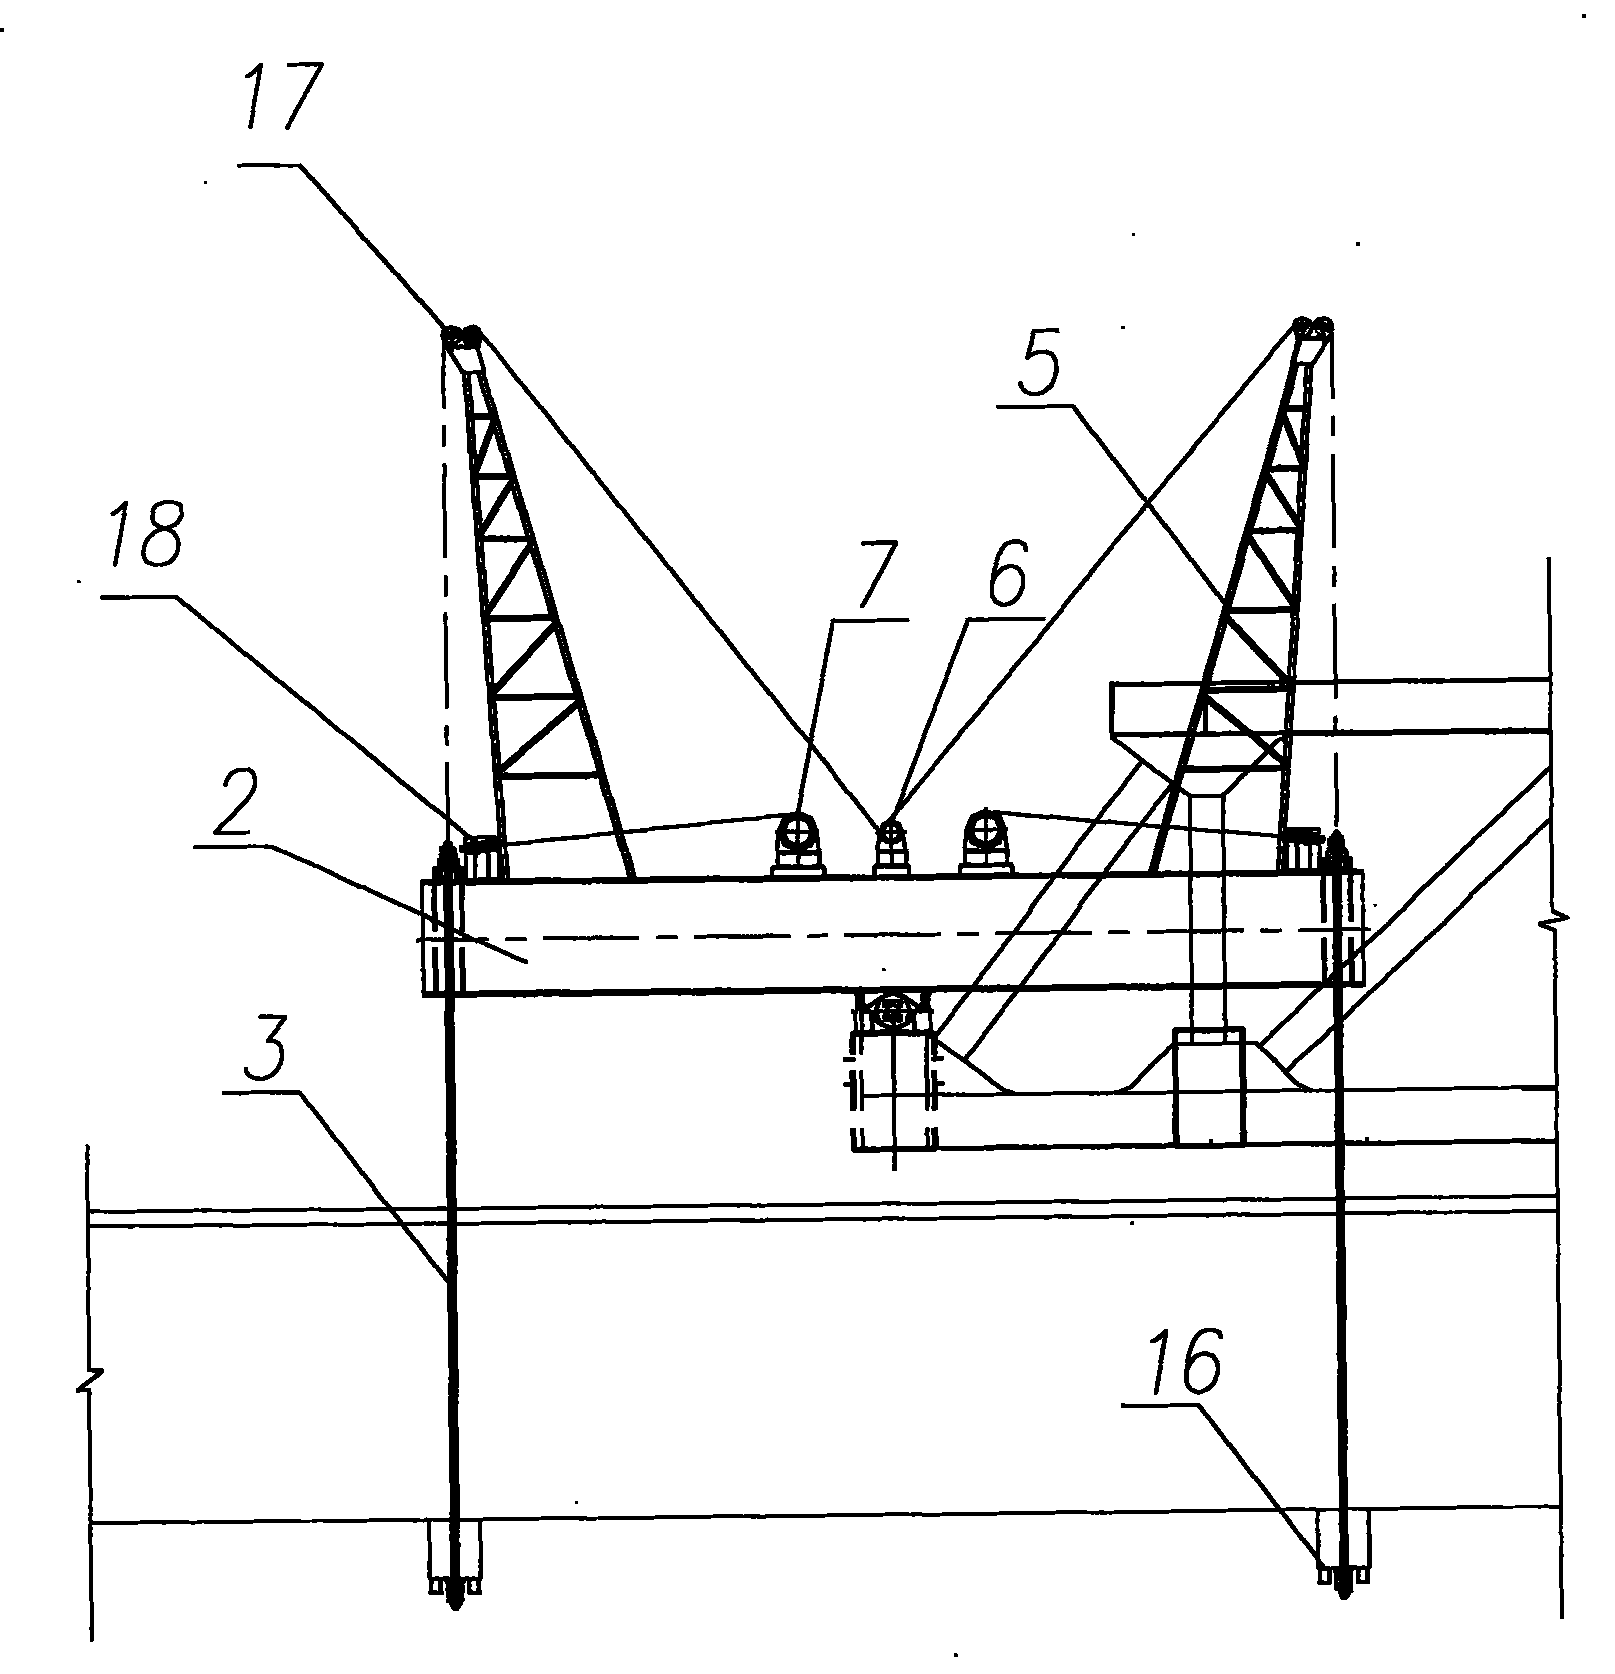 Hanging device of large-scale over-long box girder